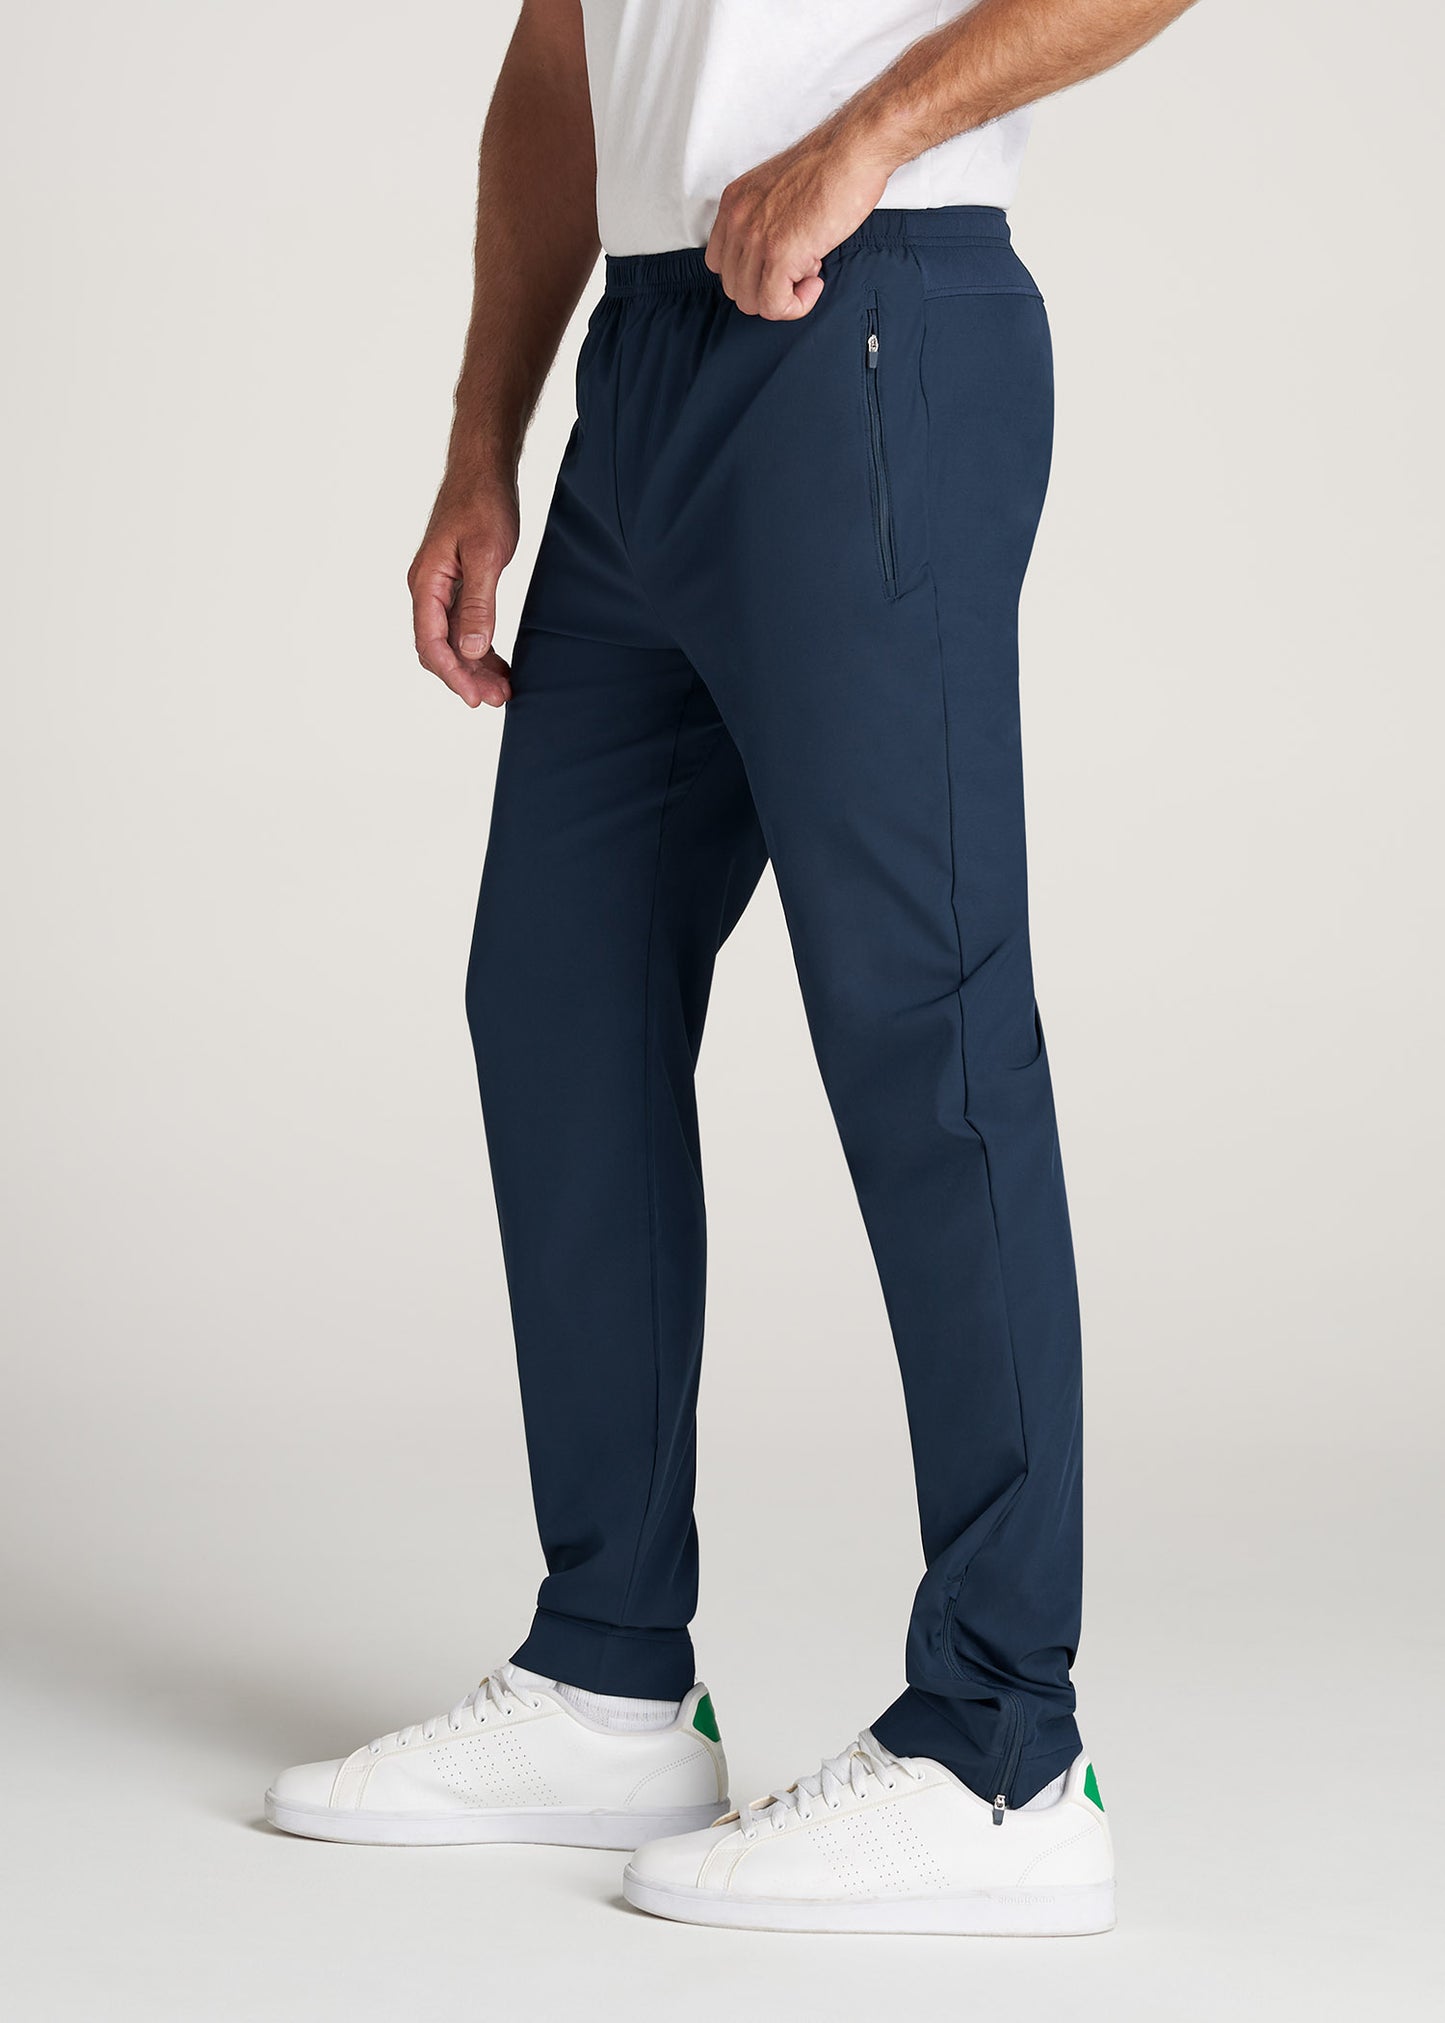 American-Tall-Men-TaperedFit-LightWeight-AthleticPant-Navy-side